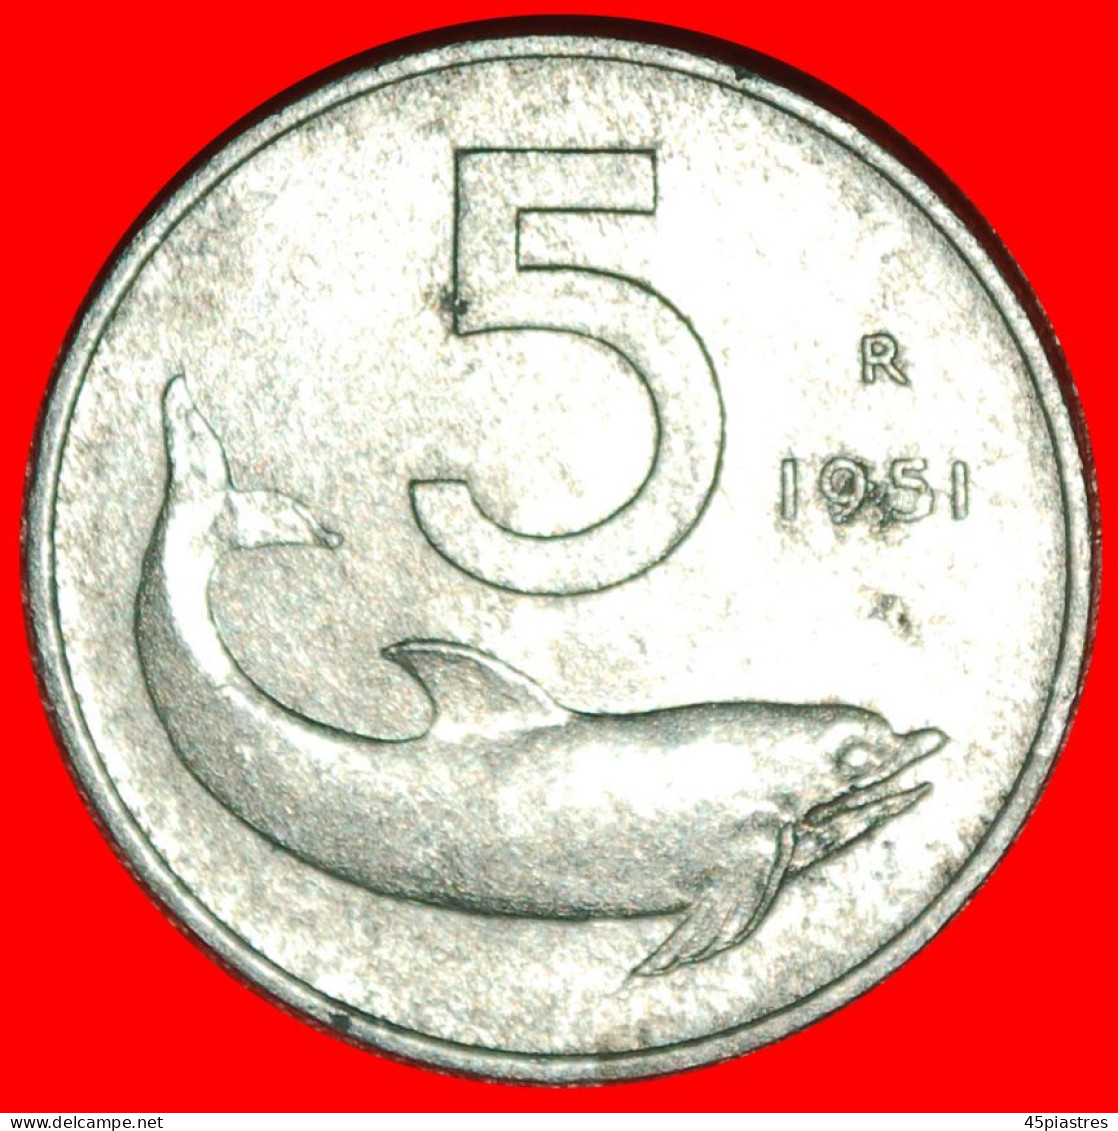 * DOLPHIN And RUDDER (1951-2001): ITALY  5 LIRAS 1951R! · LOW START ·  NO RESERVE! - 5 Liras